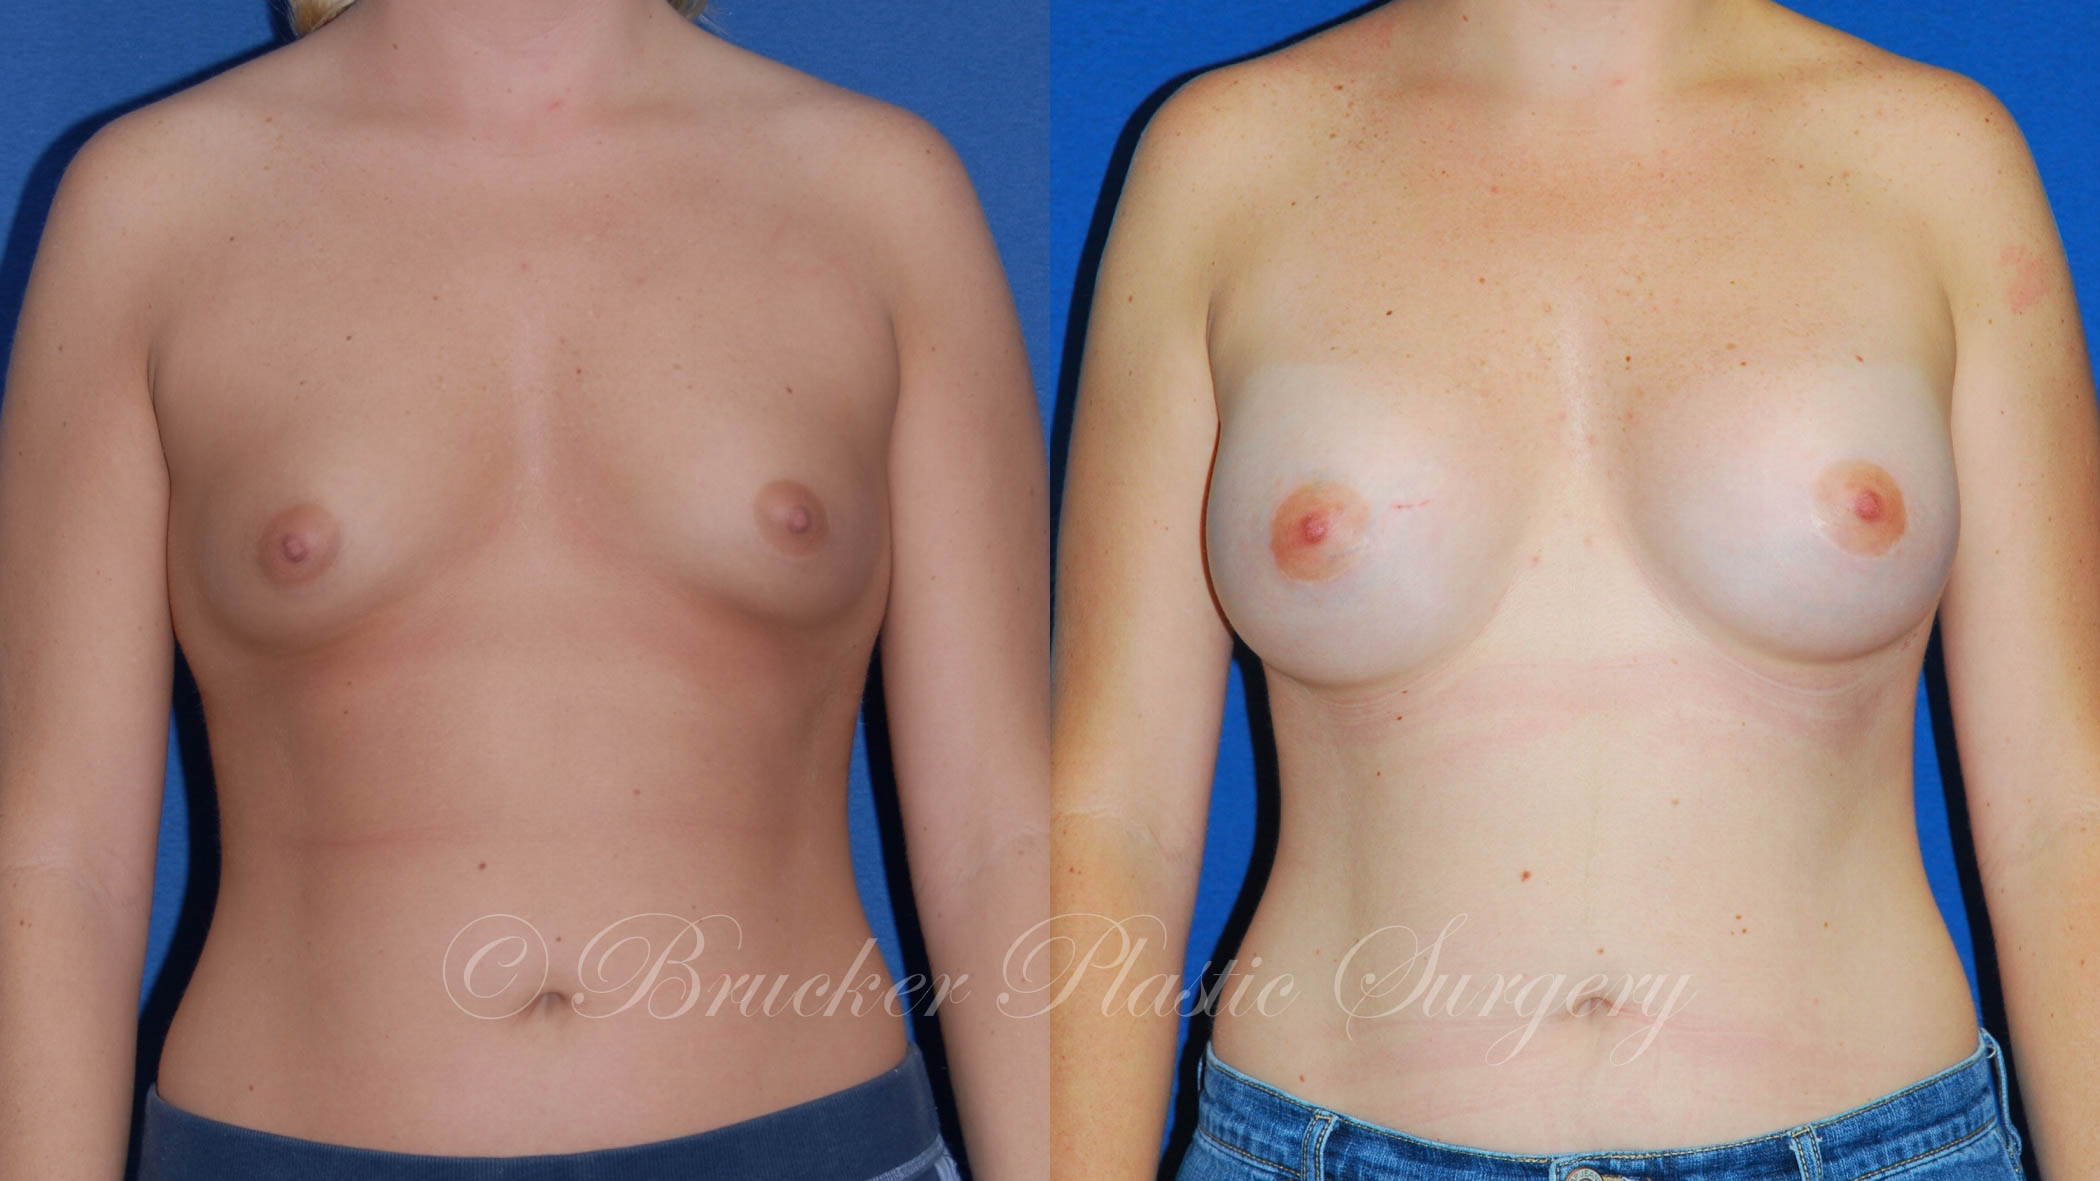 Patient 5a Breast Augmentation Before and After